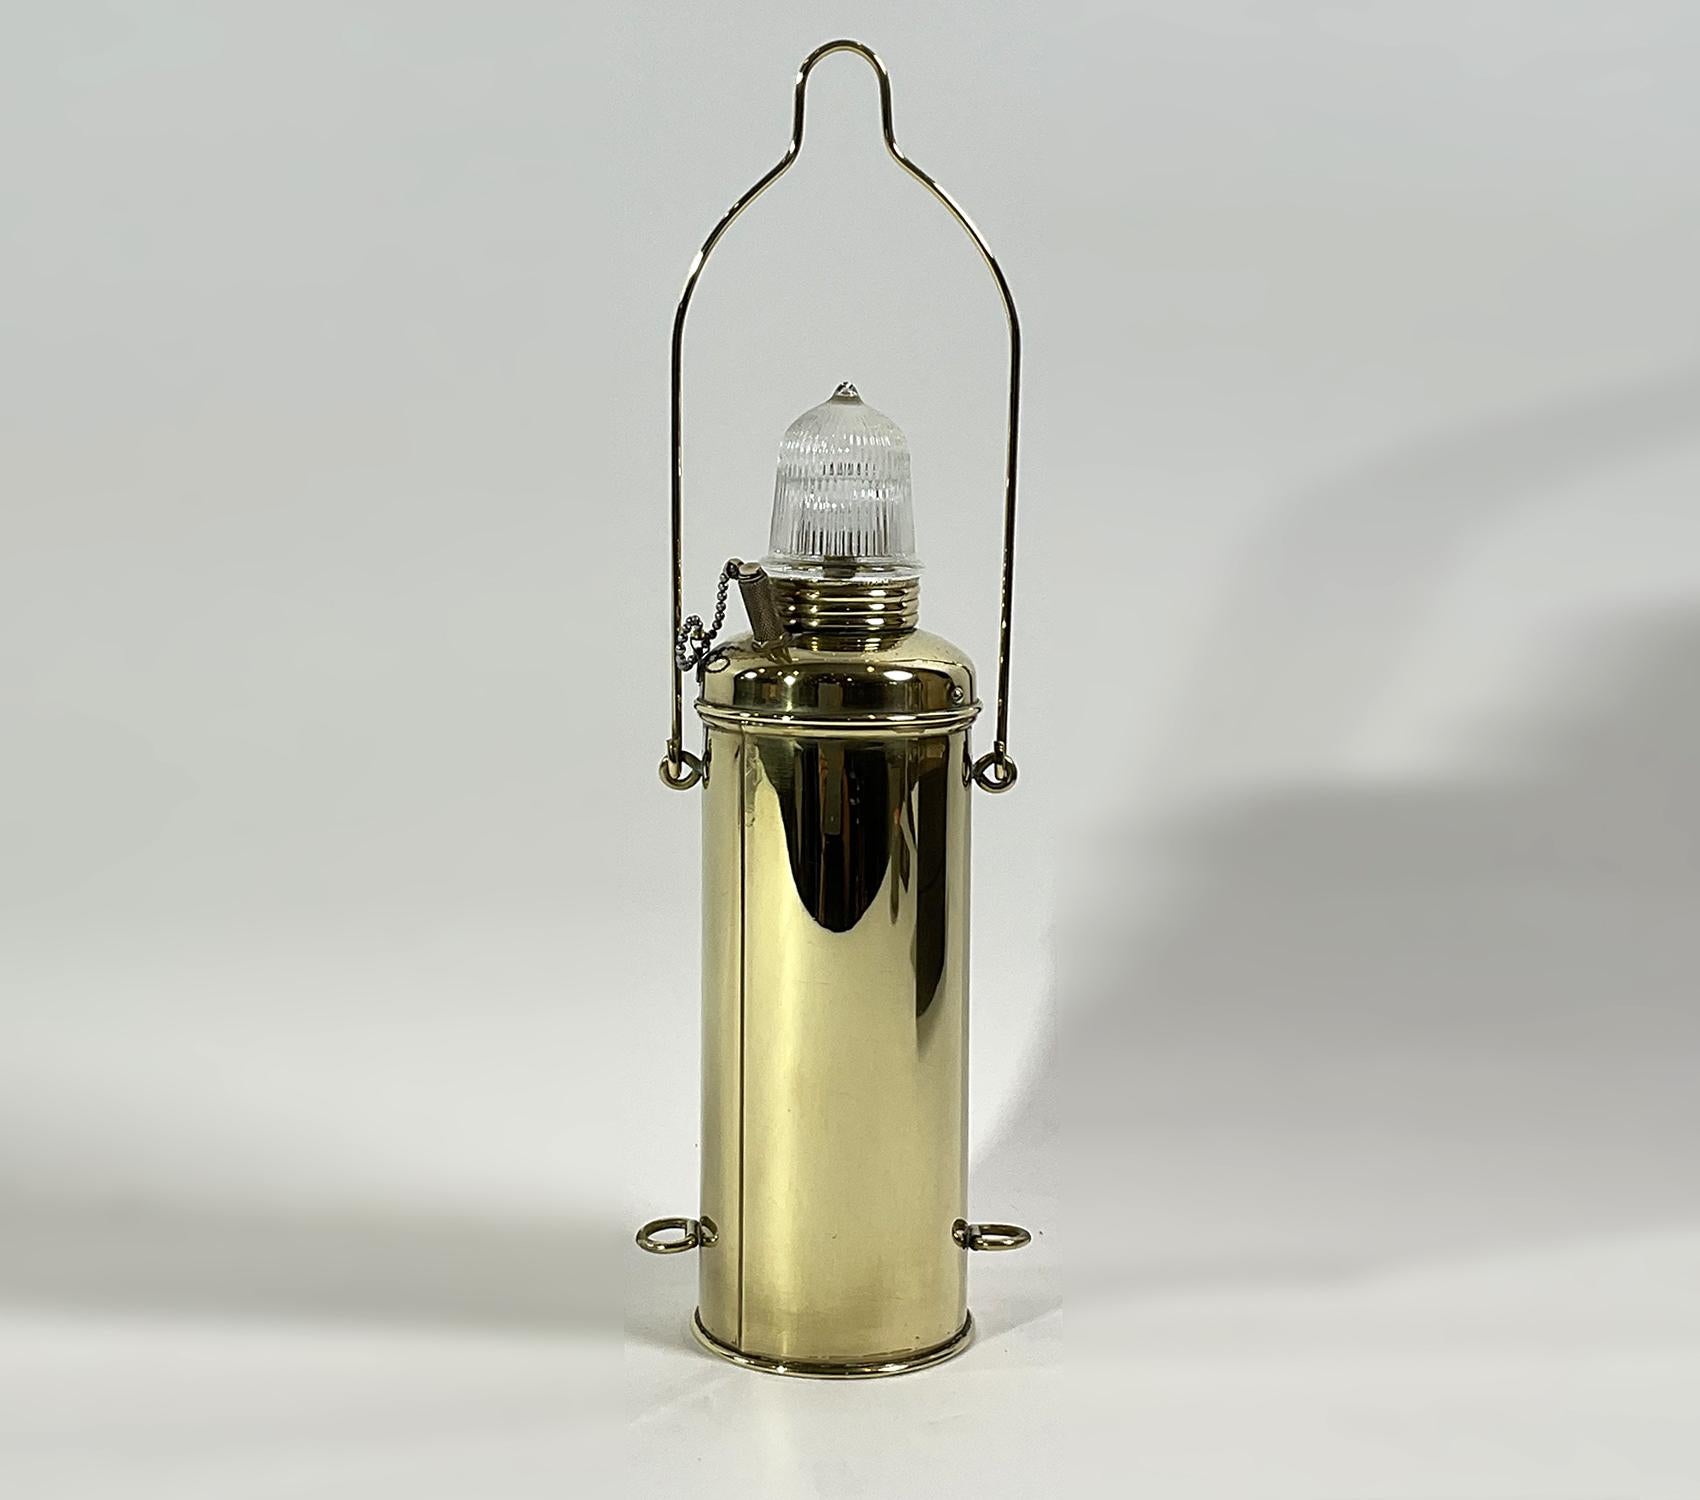 Solid brass ships anchor lantern with Fresnel glass lens. Dry cell battery lamp. Circa 1950. Fresnel glass globe. Carry handle marked with 